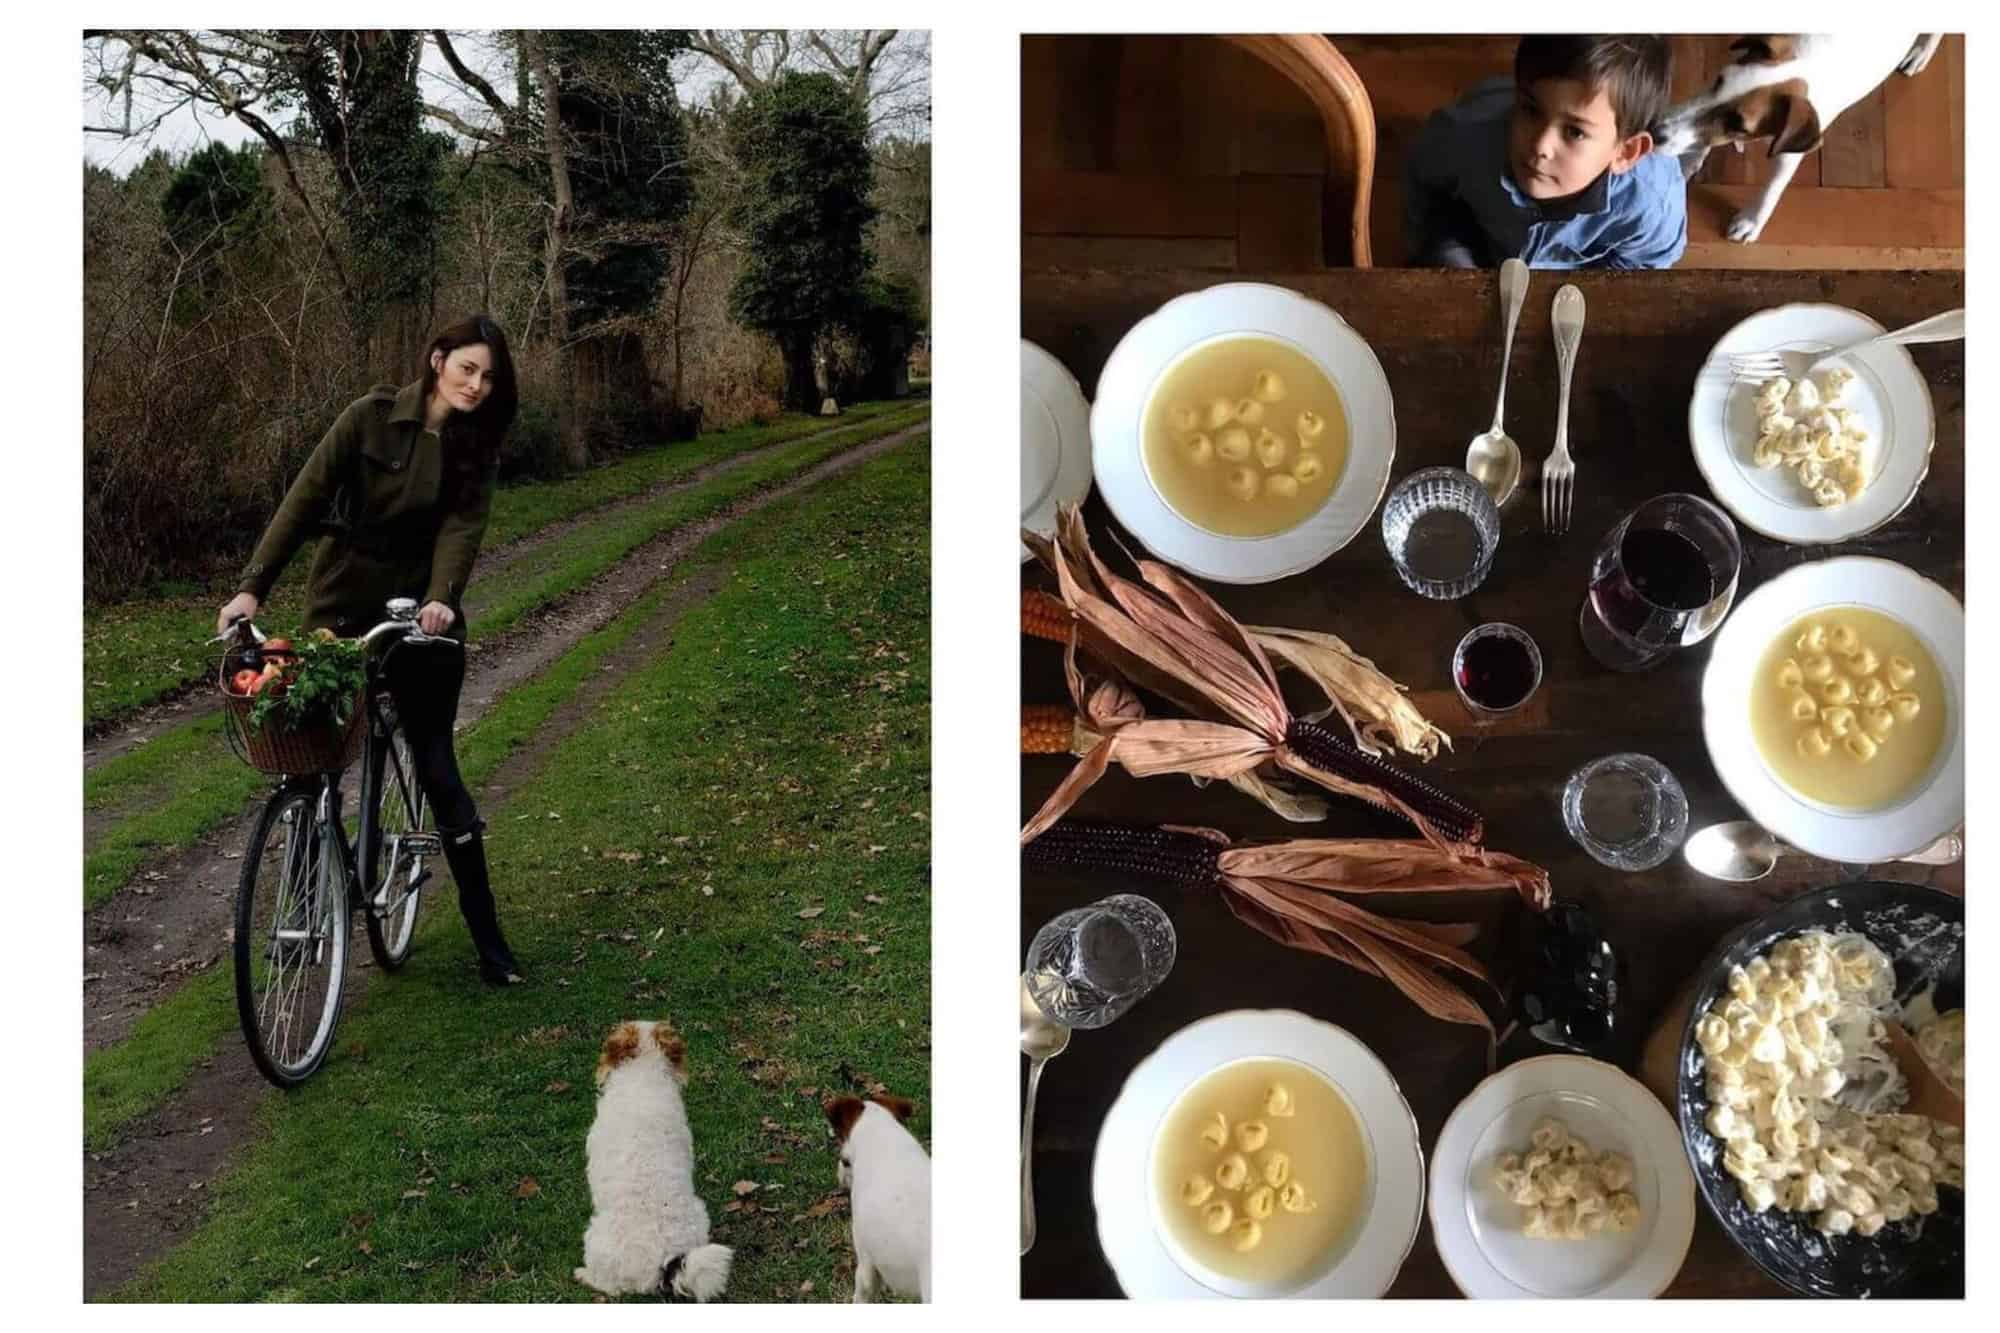 Left: a woman is on a bike on a outdoor path. There is grass with a few different dirt track marks which make out the path. There is a basket on the bike filled with vegetables. The woman has brown hair and is wearing dark clothing. She is looking at two white and brown dogs which are in the bottom left corner. Right: an aerial view of a table with food on it. There are three bowls of soup with small raviolis in it. There are a few glasses of wine and water and there are ears of dark colored corn on the table. A little boy wearing a blue shirt is looking up and there is a small brown and white dog behind him. 